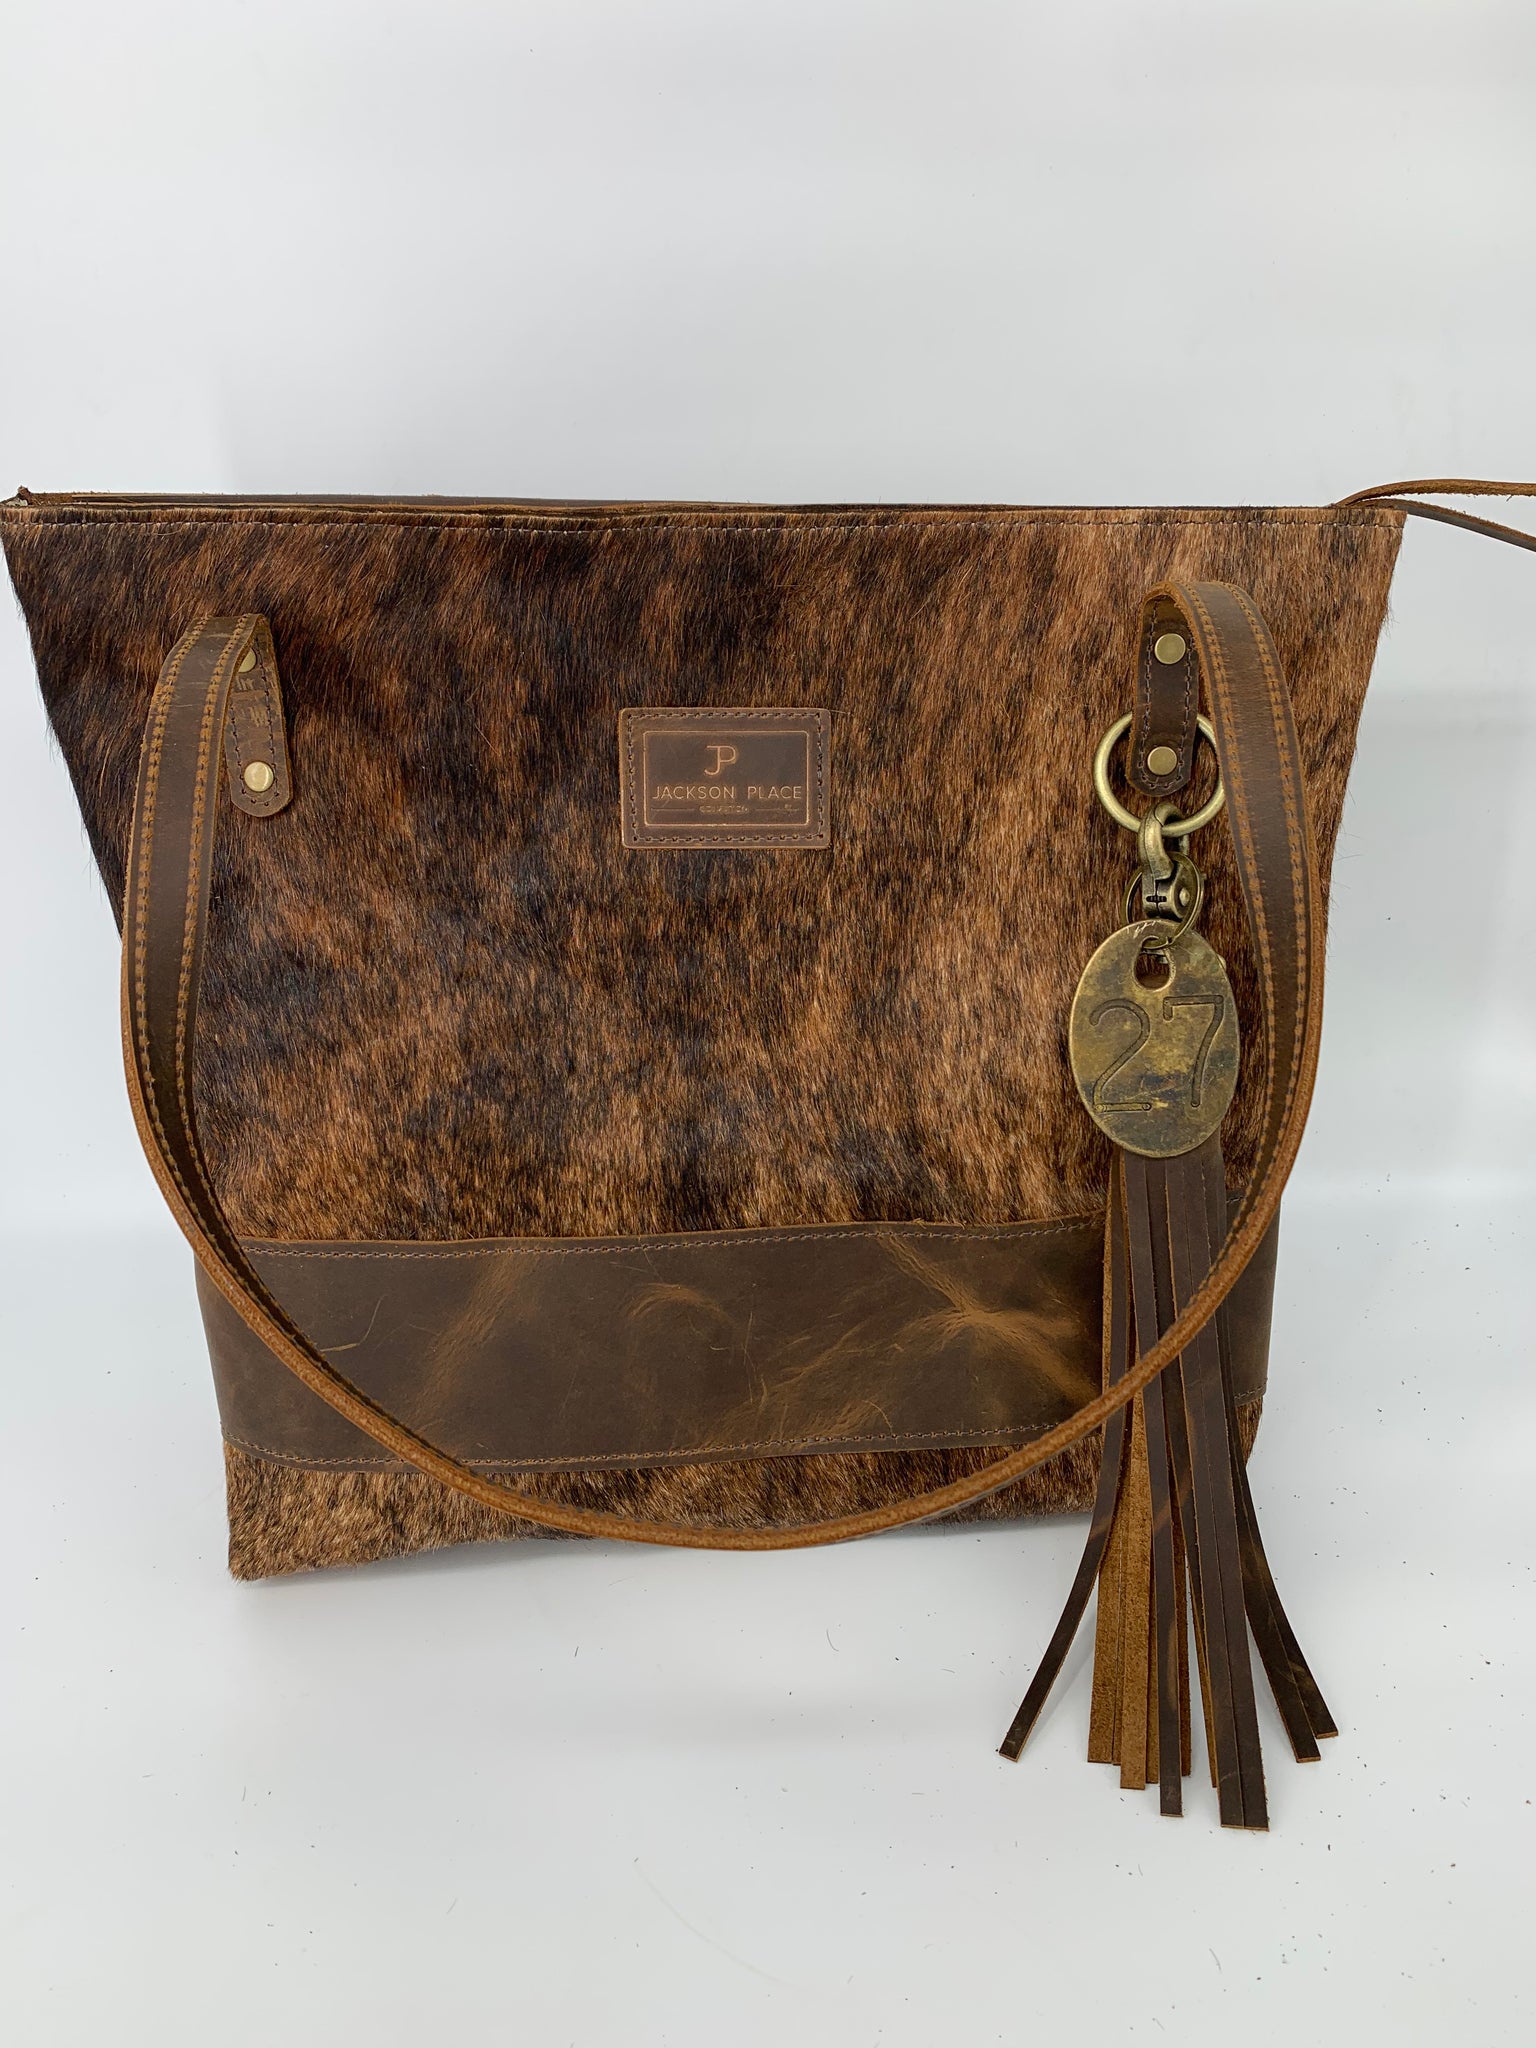 Large Carmel Leather Tote with Brindle Hair-on-Hide Bag Strap